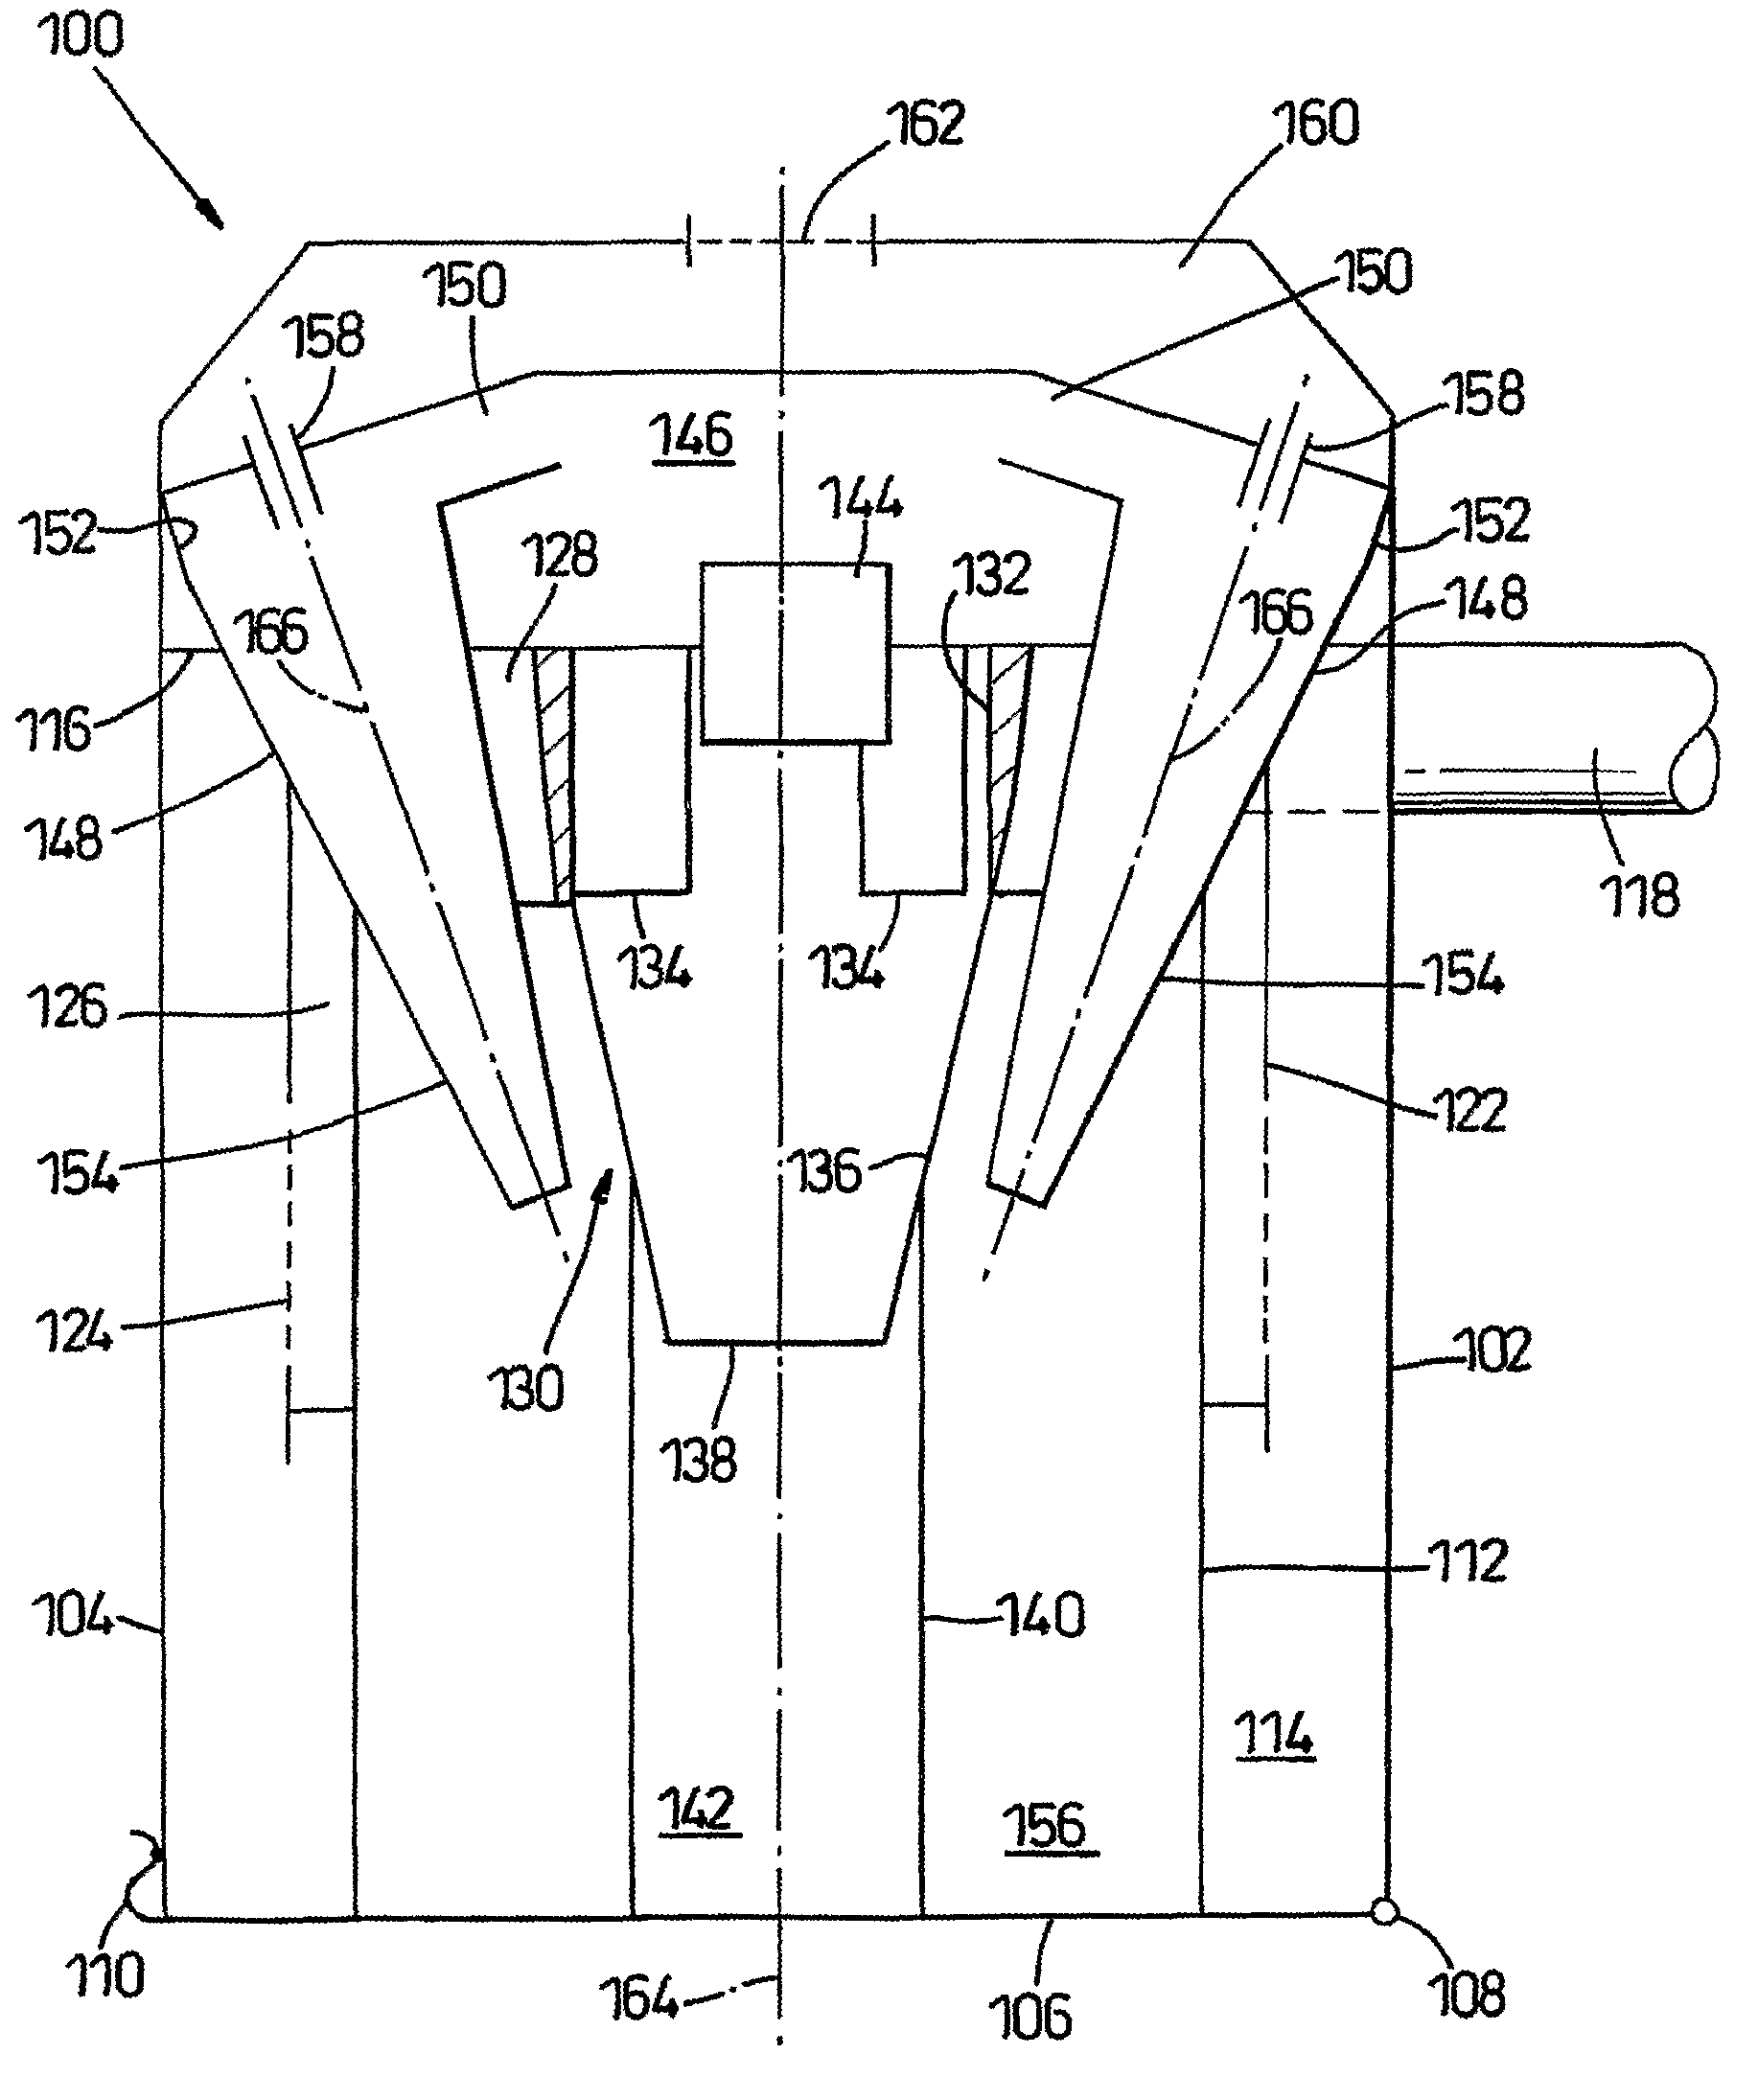 Dirt and dust cyclonic separating apparatus